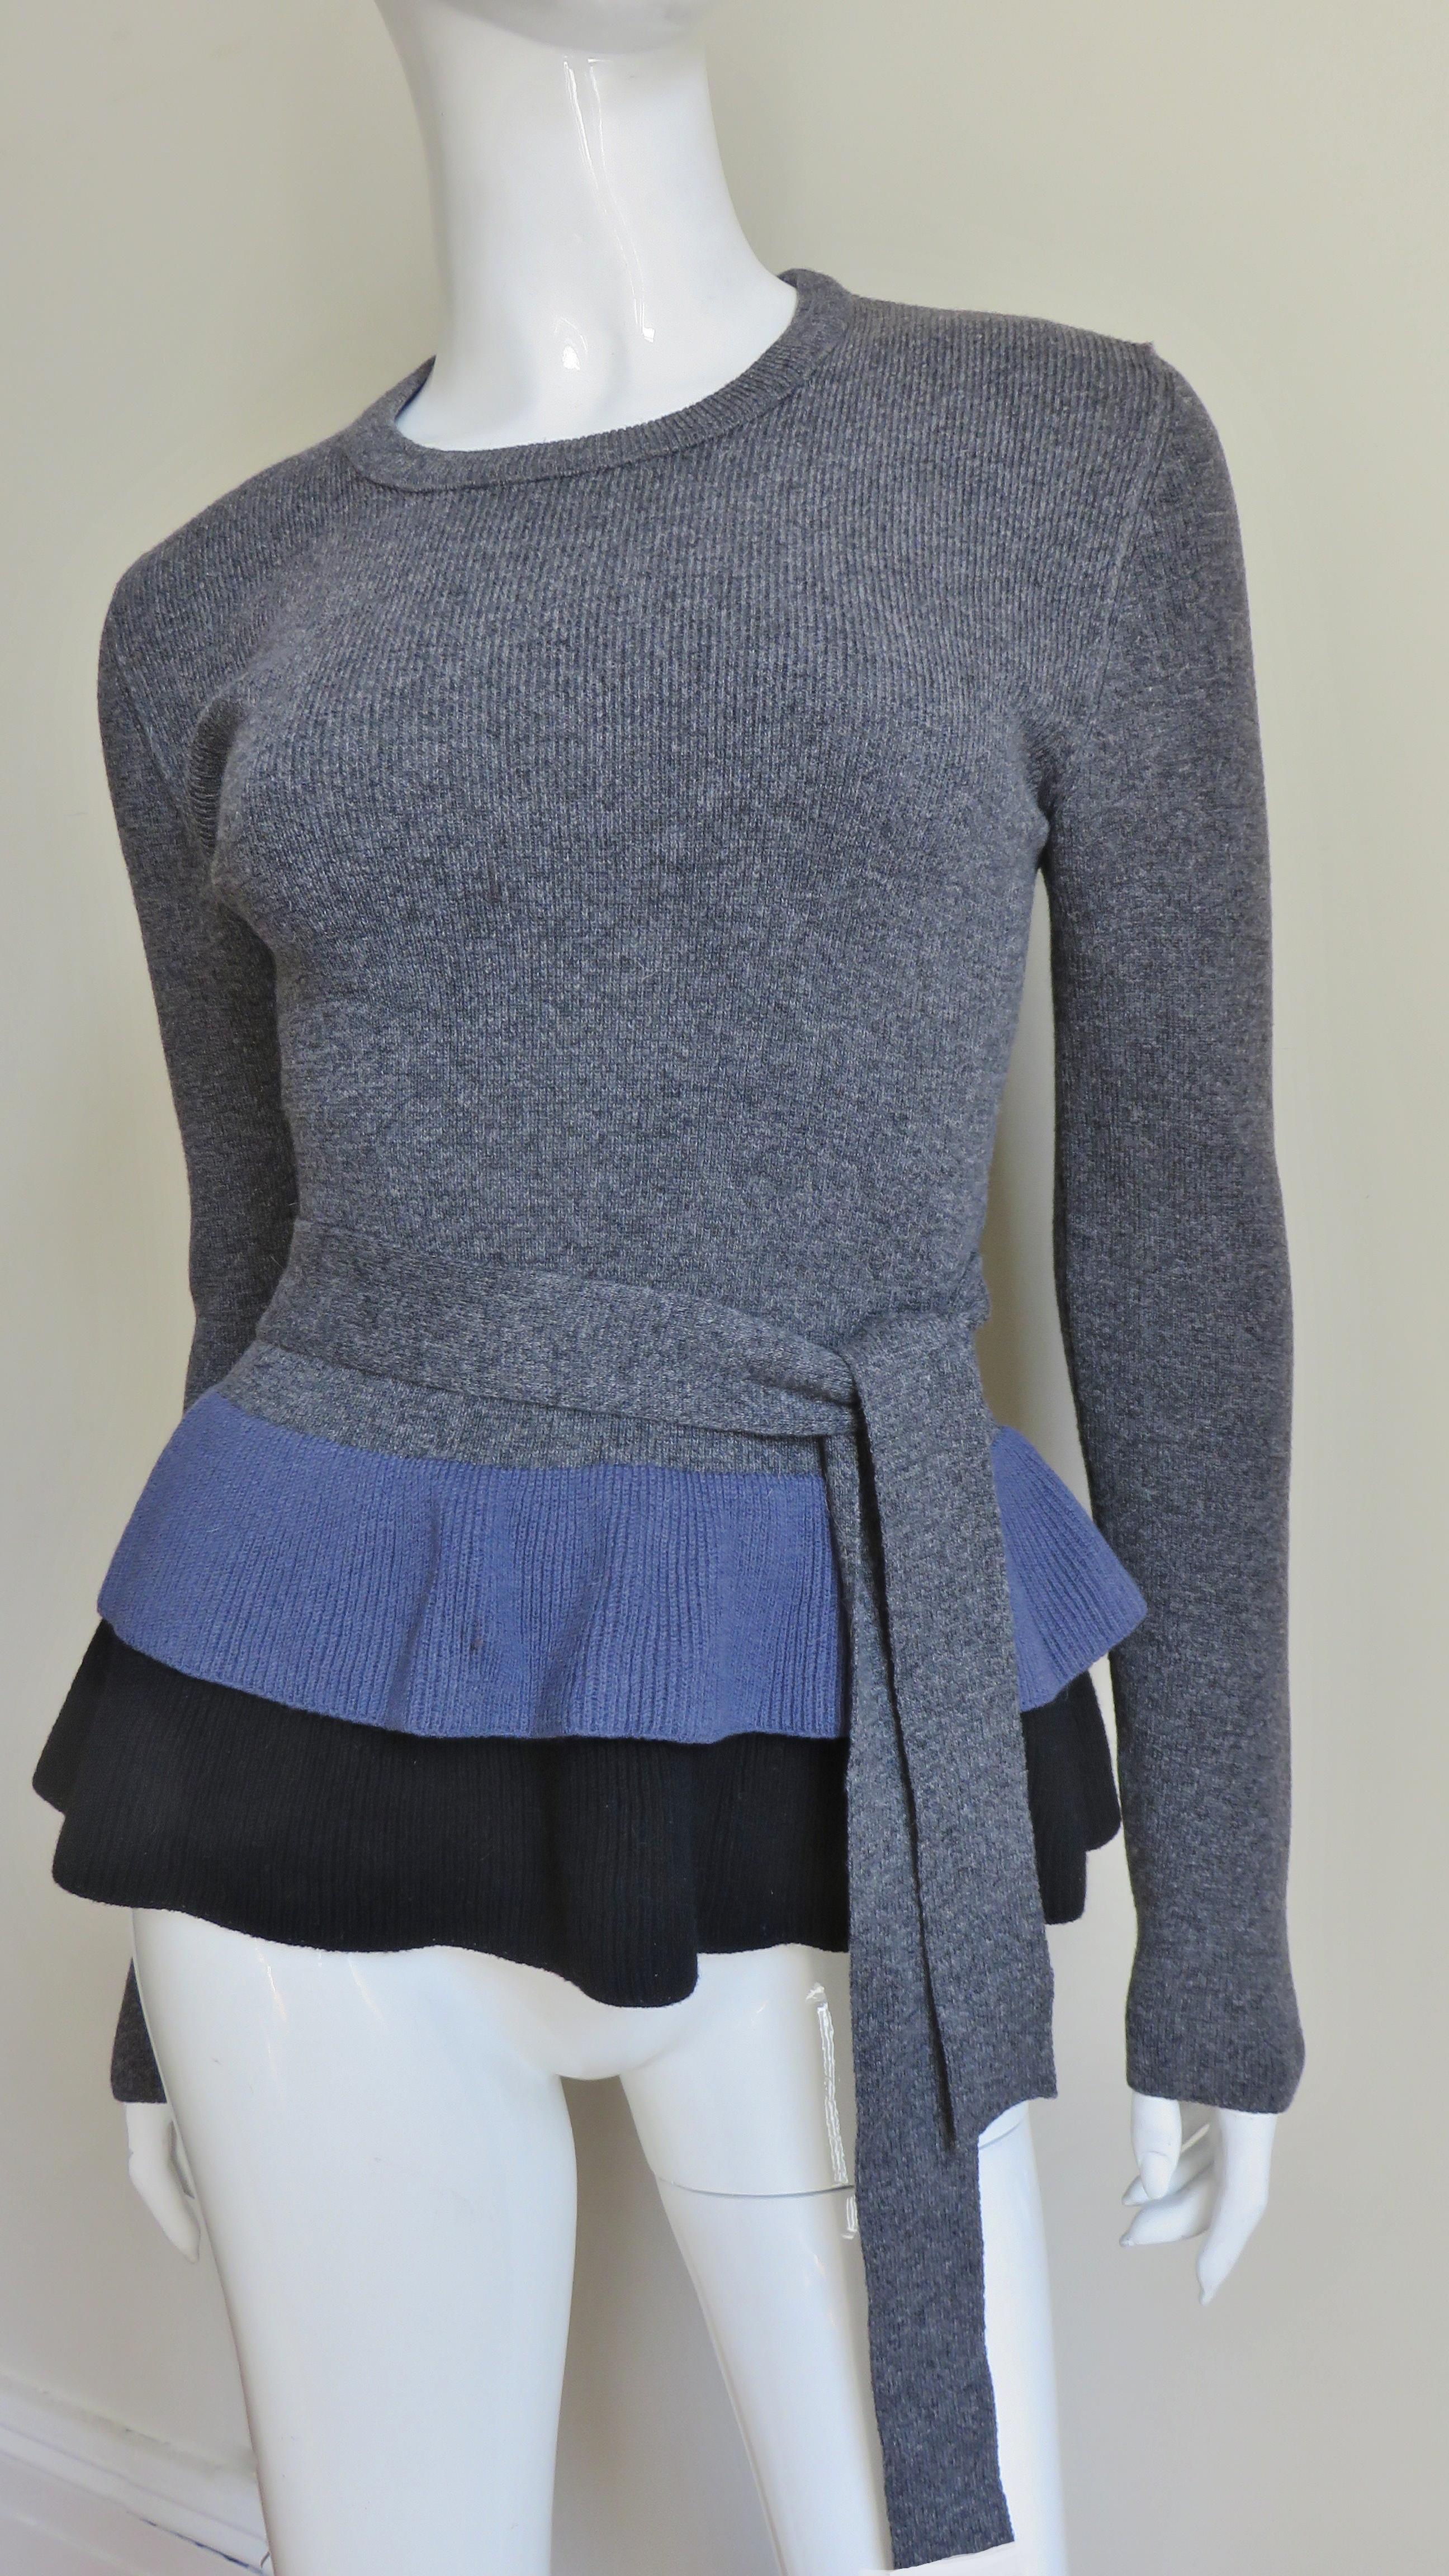 A gorgeous wool knit sweater from Sonia Rykiel in a black, purple and grey angora wool blend.   It has long sleeves, a crew neckline, a fabulous layered flounce or peplum bottom in black and purple and a grey tie at the waist.
Fits sizes Small,